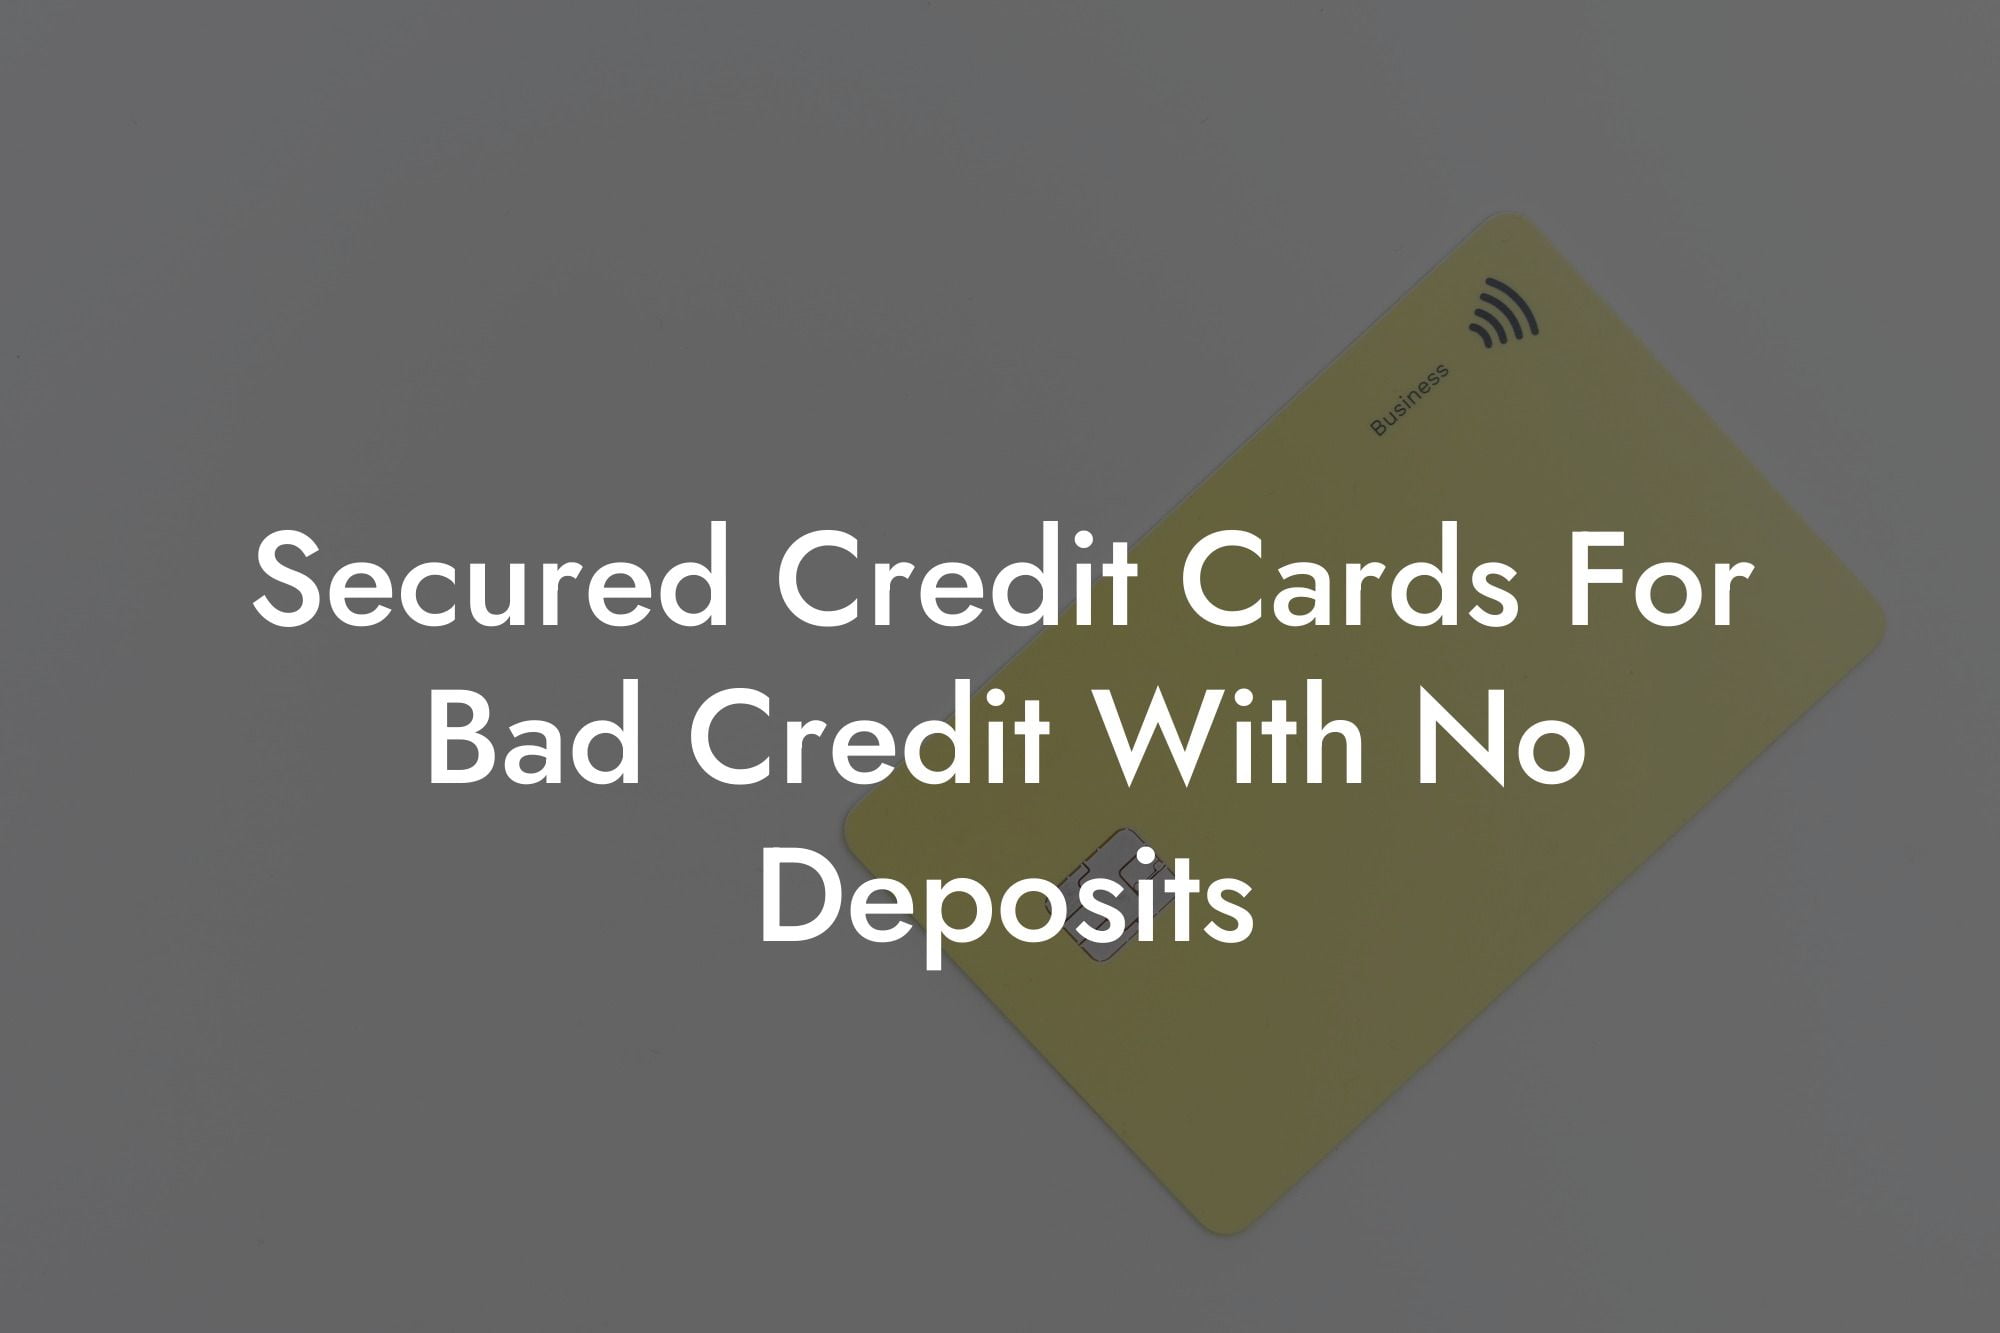 Secured Credit Cards For Bad Credit With No Deposits